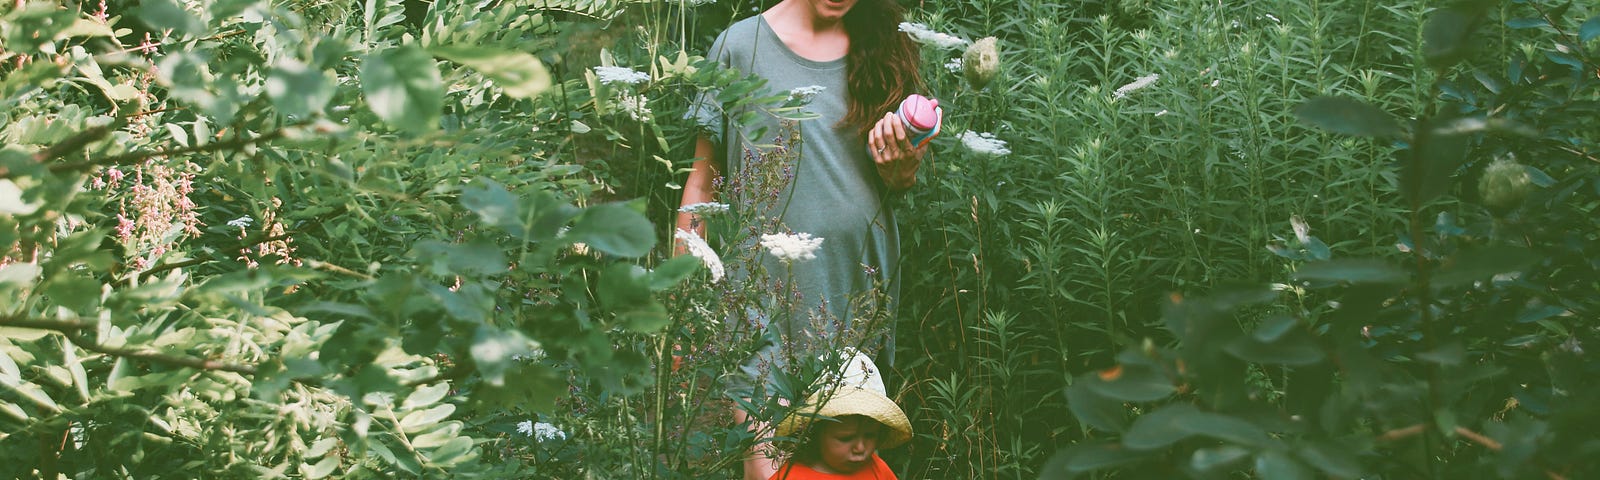 A mother accompanying her young child as he walks in a garden.